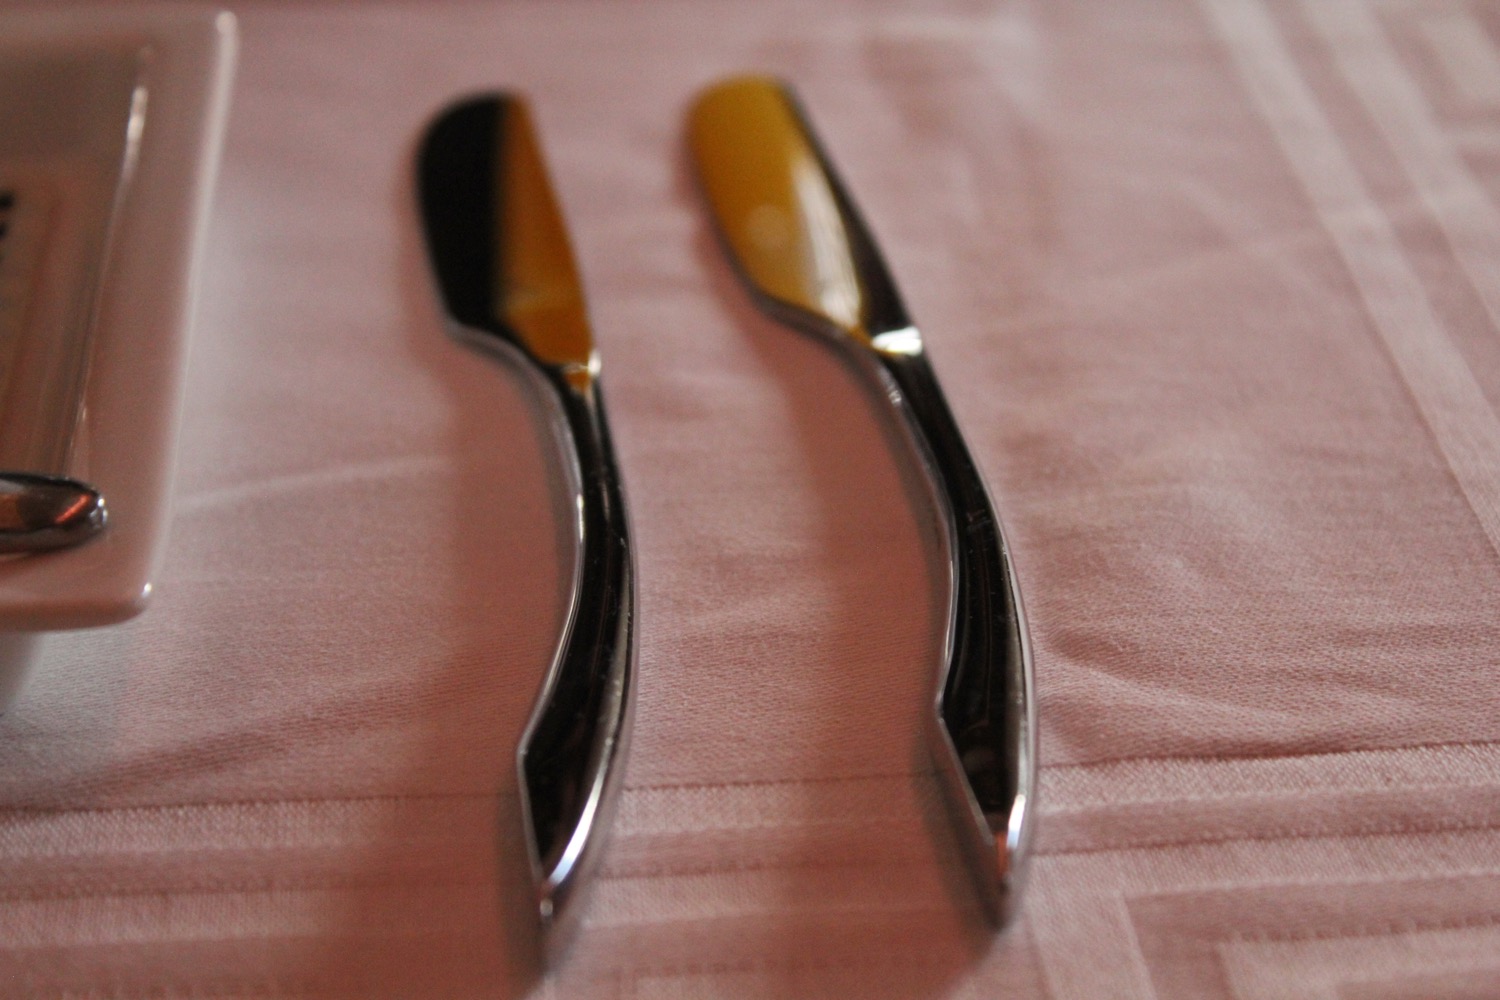 a pair of butter knives on a pink cloth